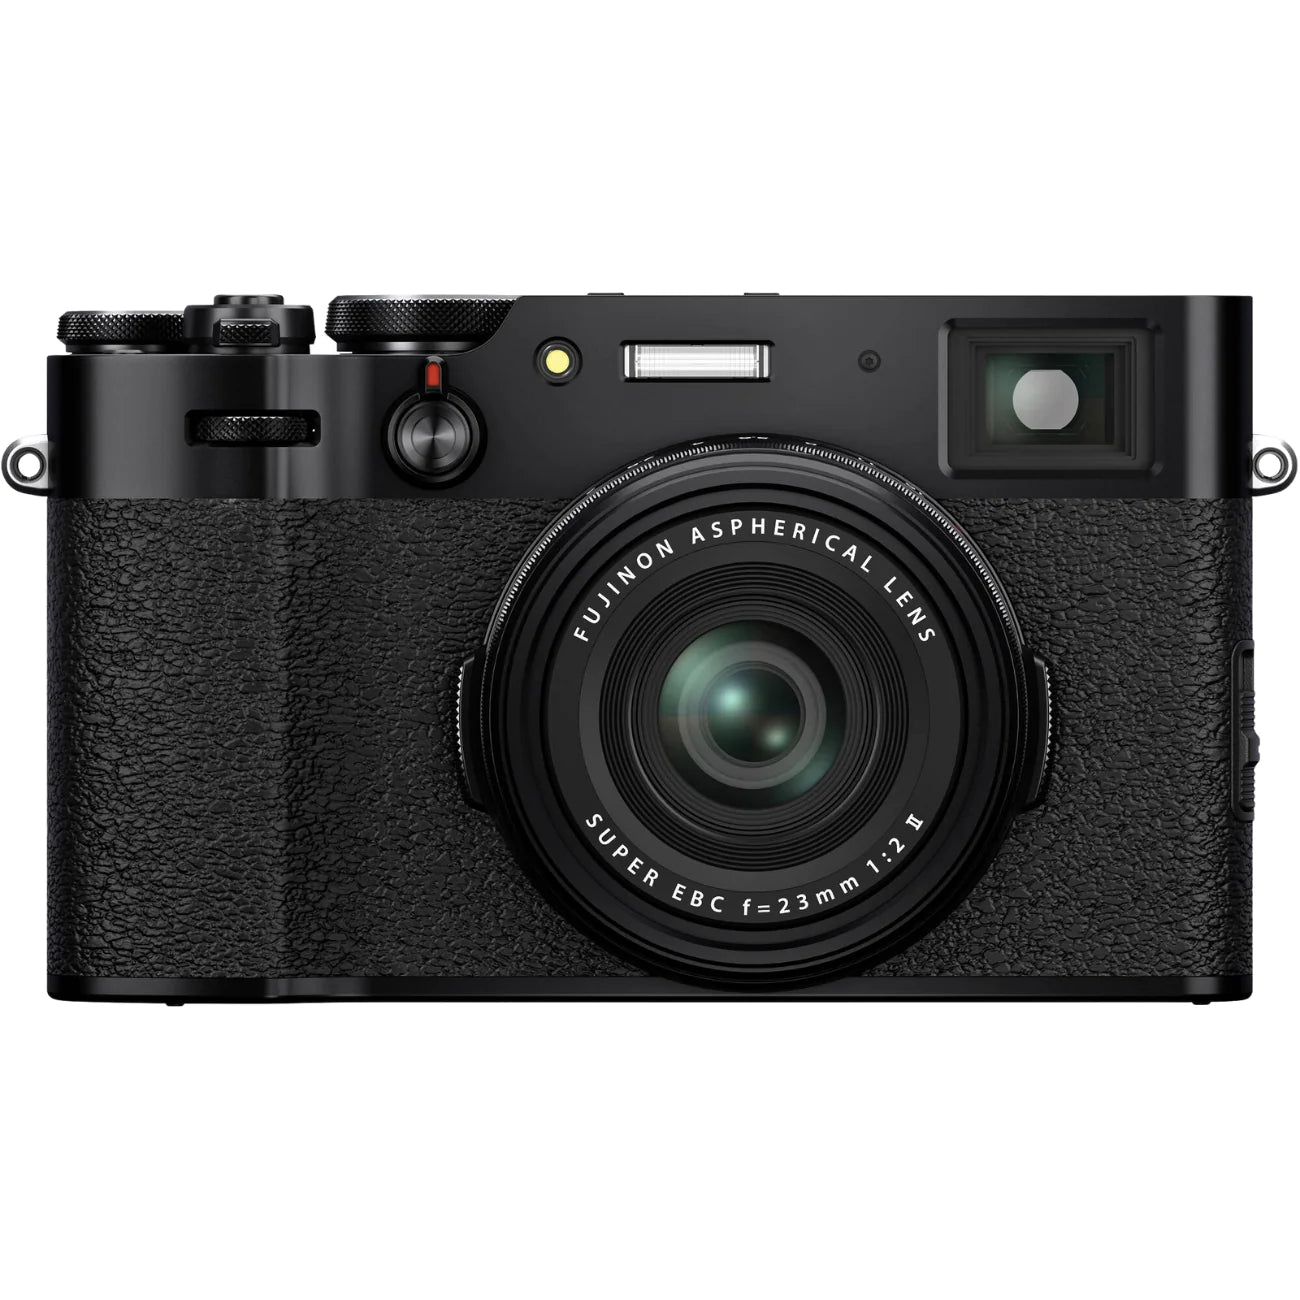 Rumors About The New Successor To Fujifilm X100V